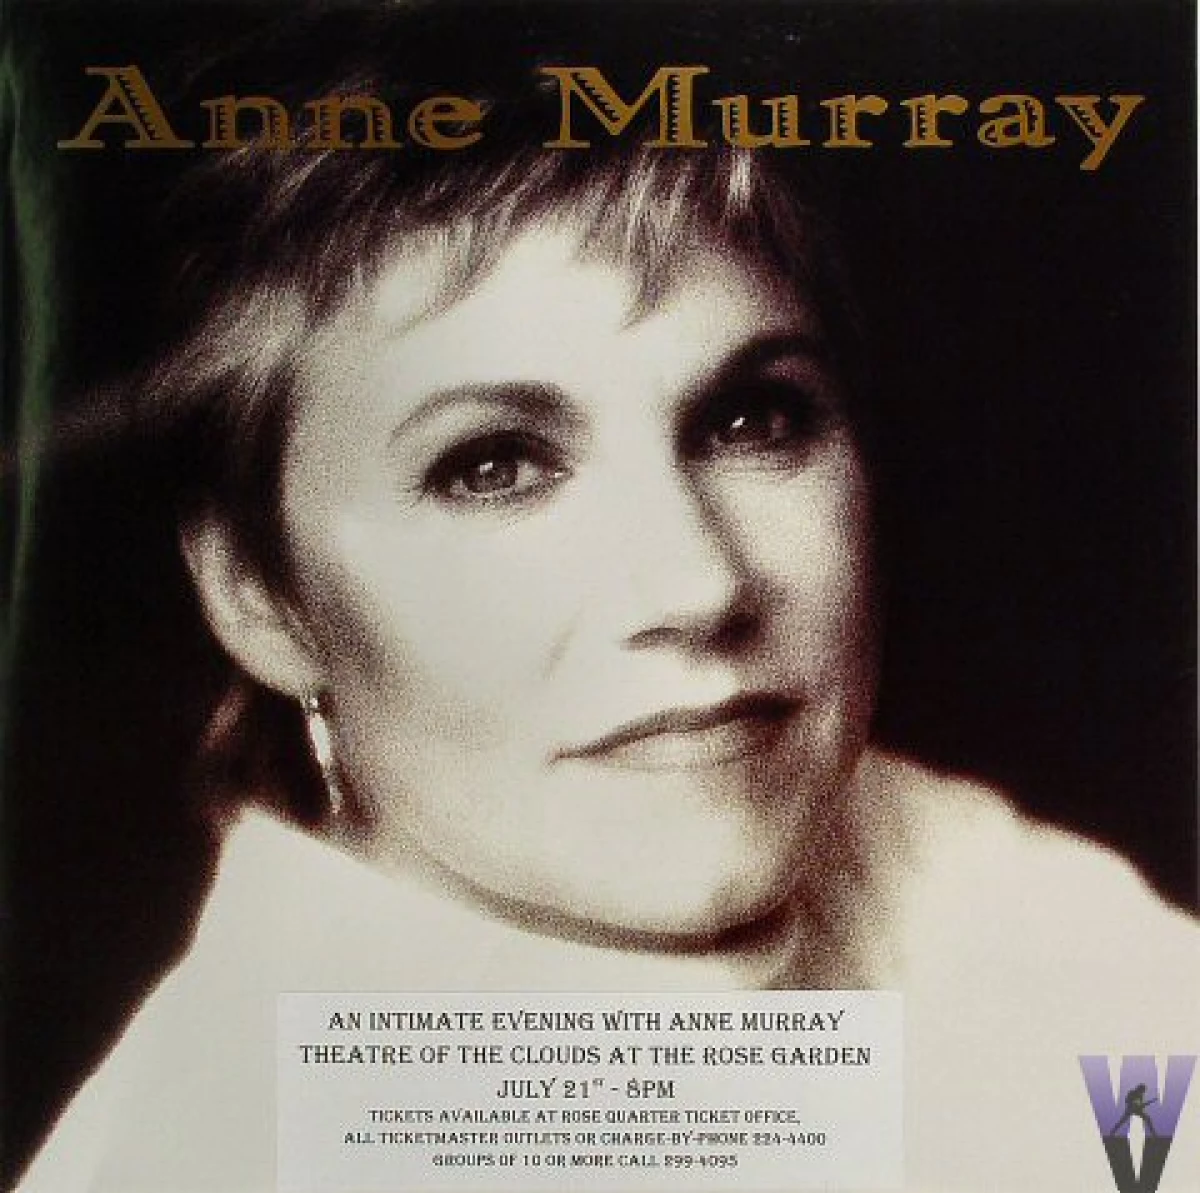 Anne Murray - Anne Murray Vintage Concert Poster from Portland Rose Garden, Jul 21, 1997  at Wolfgang's